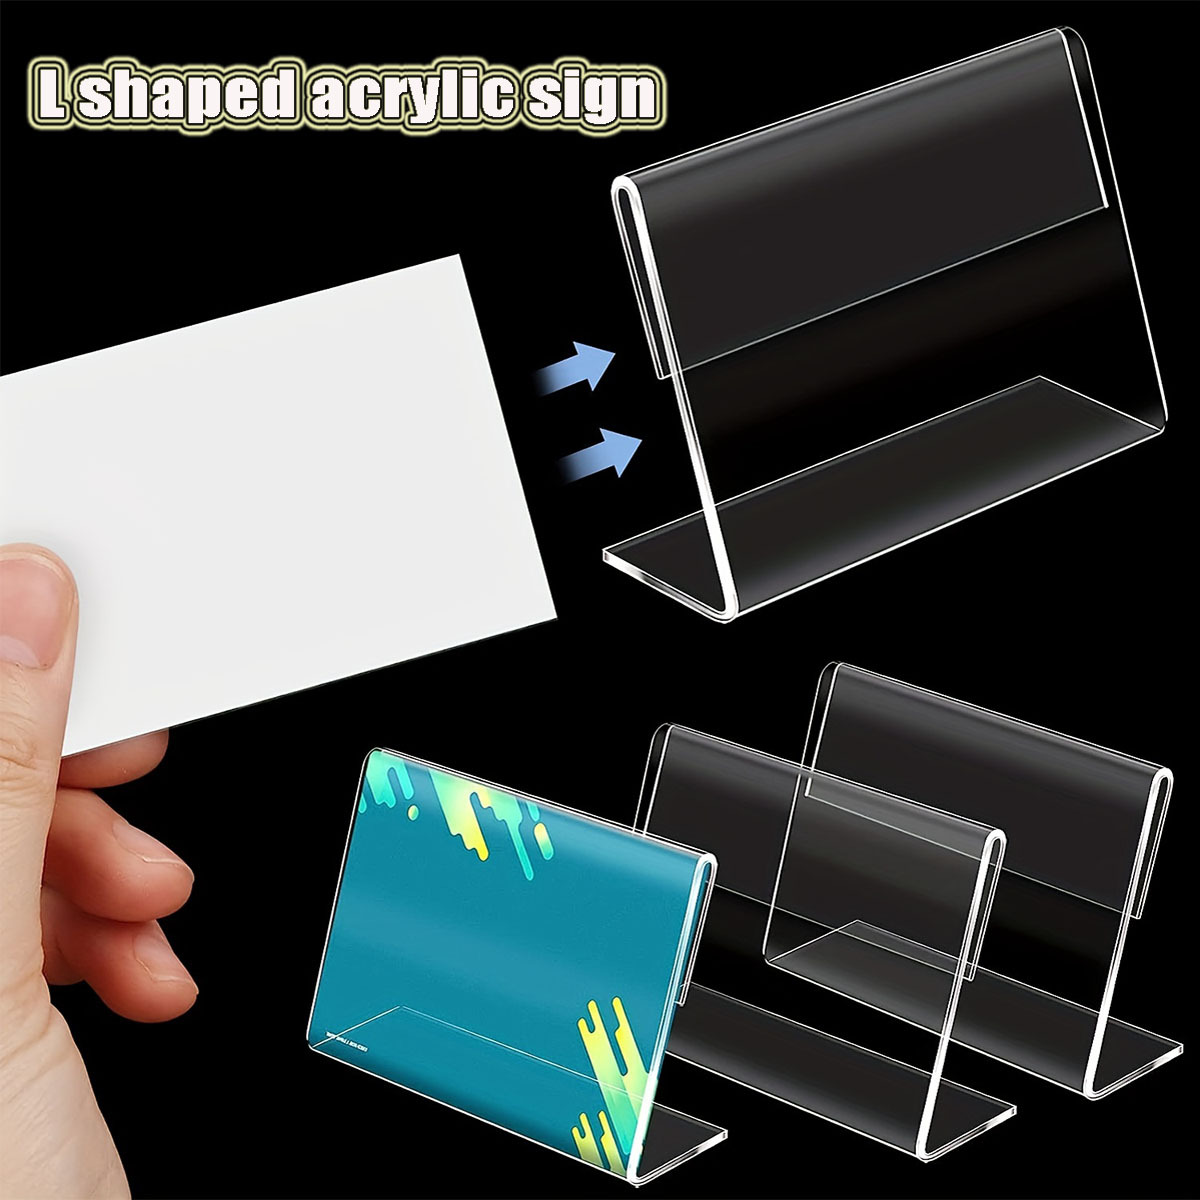  4 x 6 Inches Acrylic Post Card Photo Holders Rigid Plastic  Cards Sleeve Protectors Clear Acrylic Sleeve for Cards Baseball Card Sports  Cards Photos Postcard (60) : Office Products